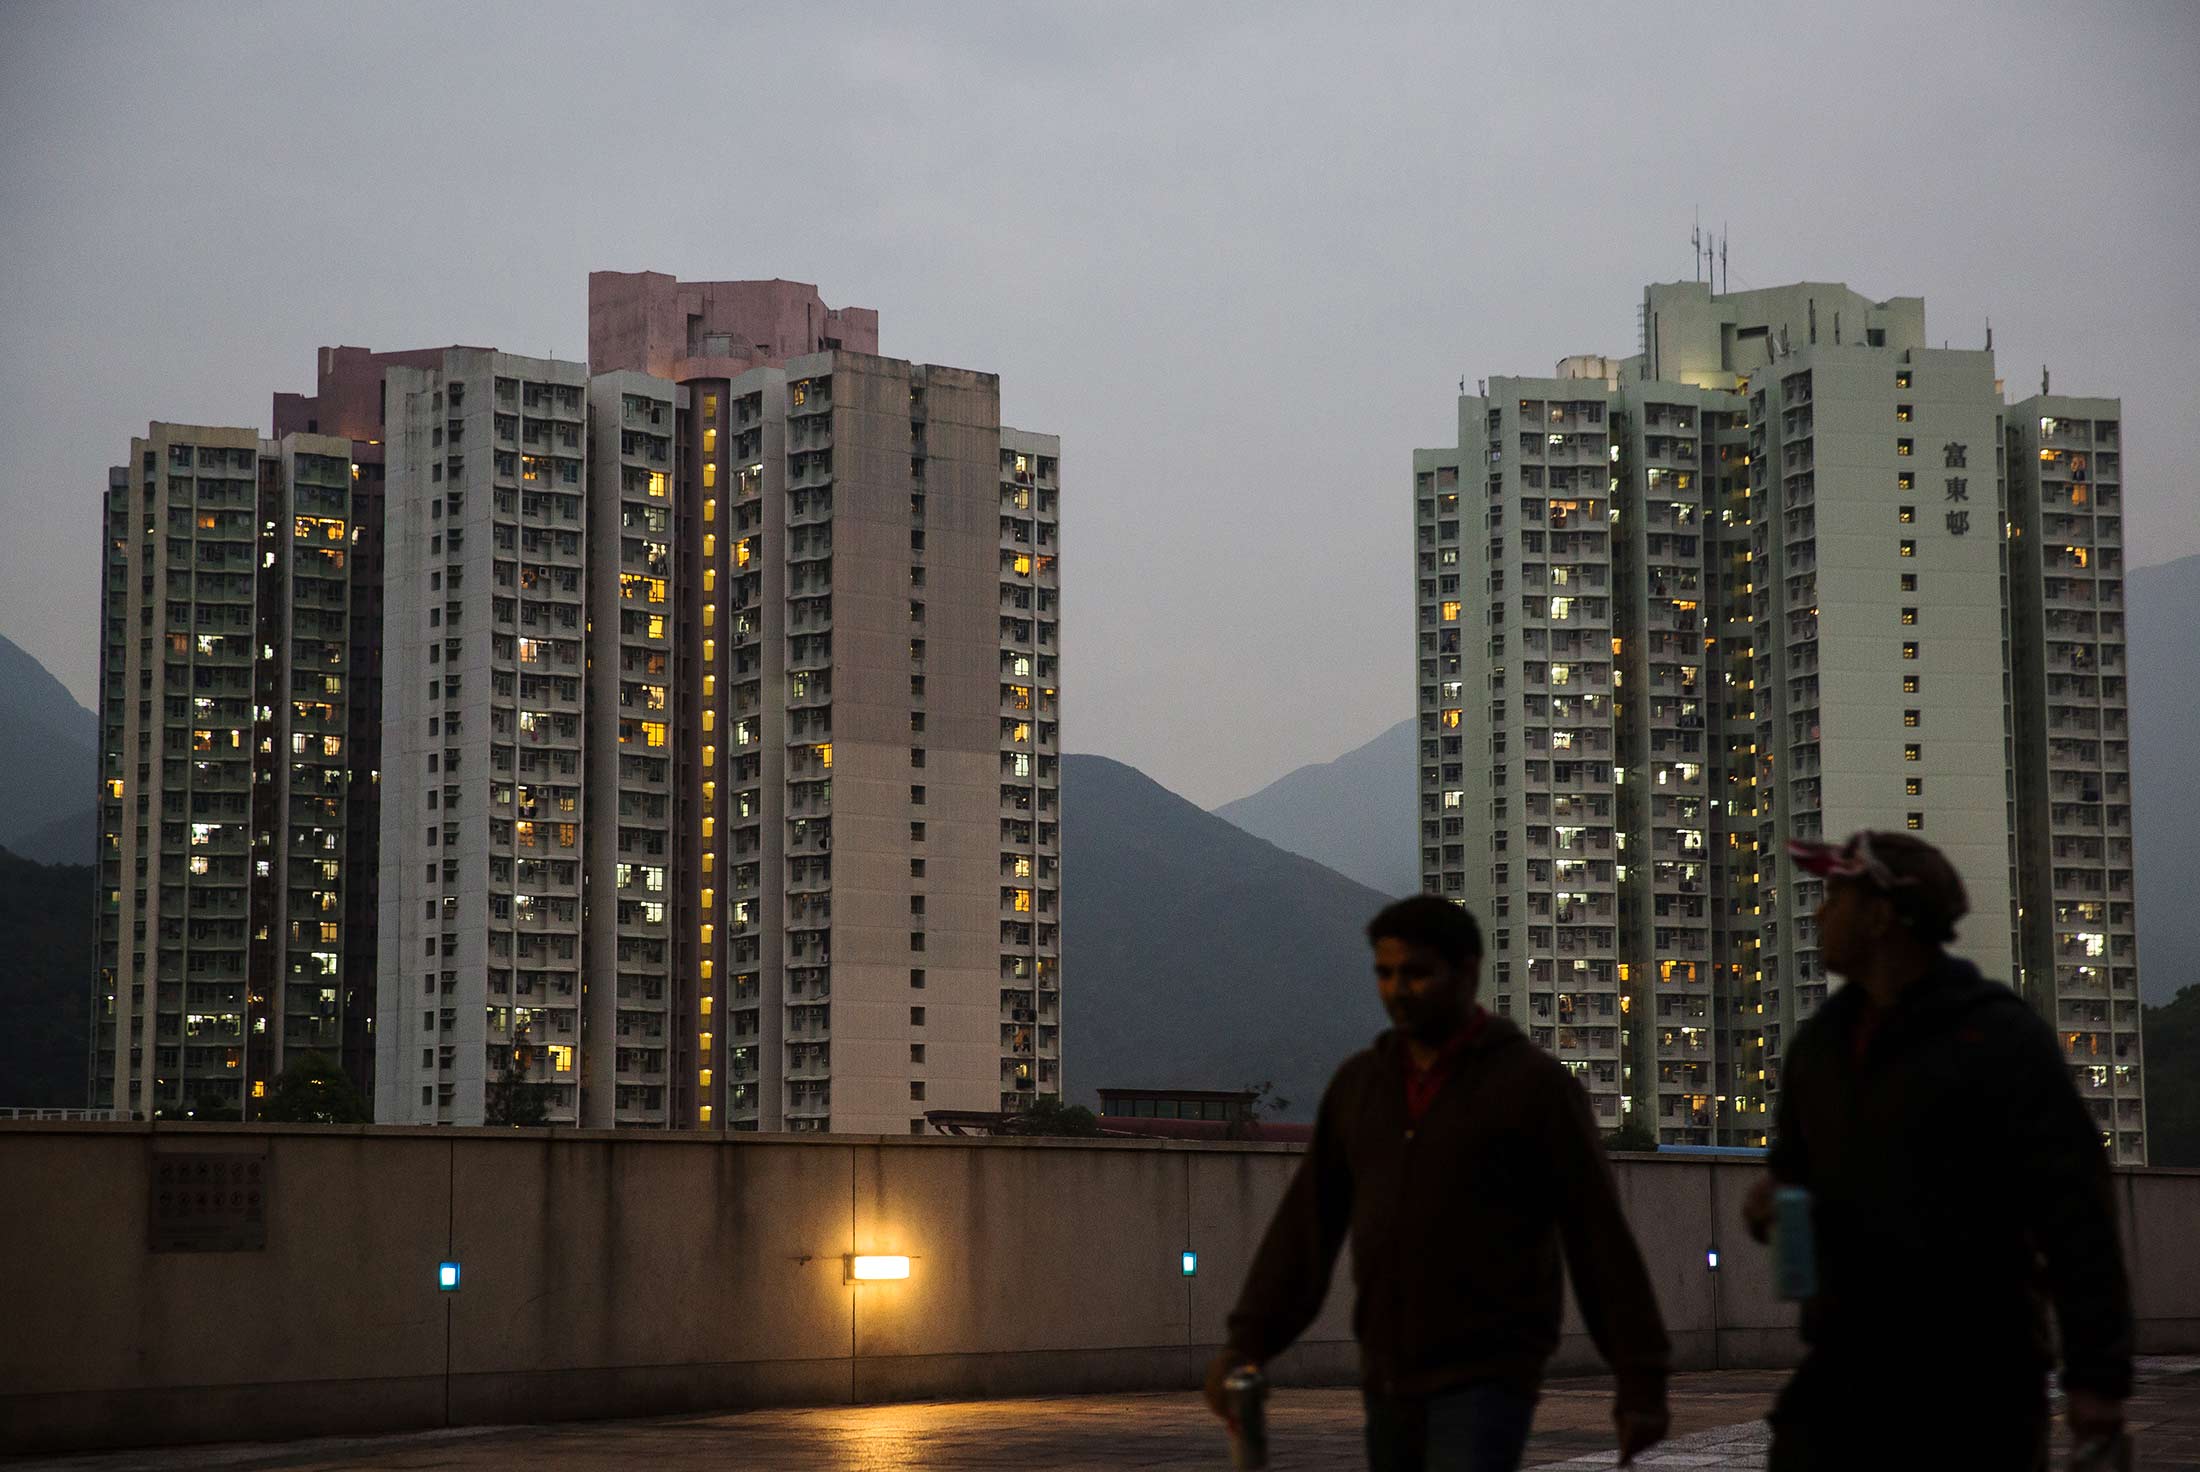 Pedestrians walk past residential buildings illuminated at night in the Tung Chung area of Hong Kong, China, on Wednesday, Feb. 3, 2016. Hong Kong is seeing negative-equity mortgages for the first time since September 2014.
